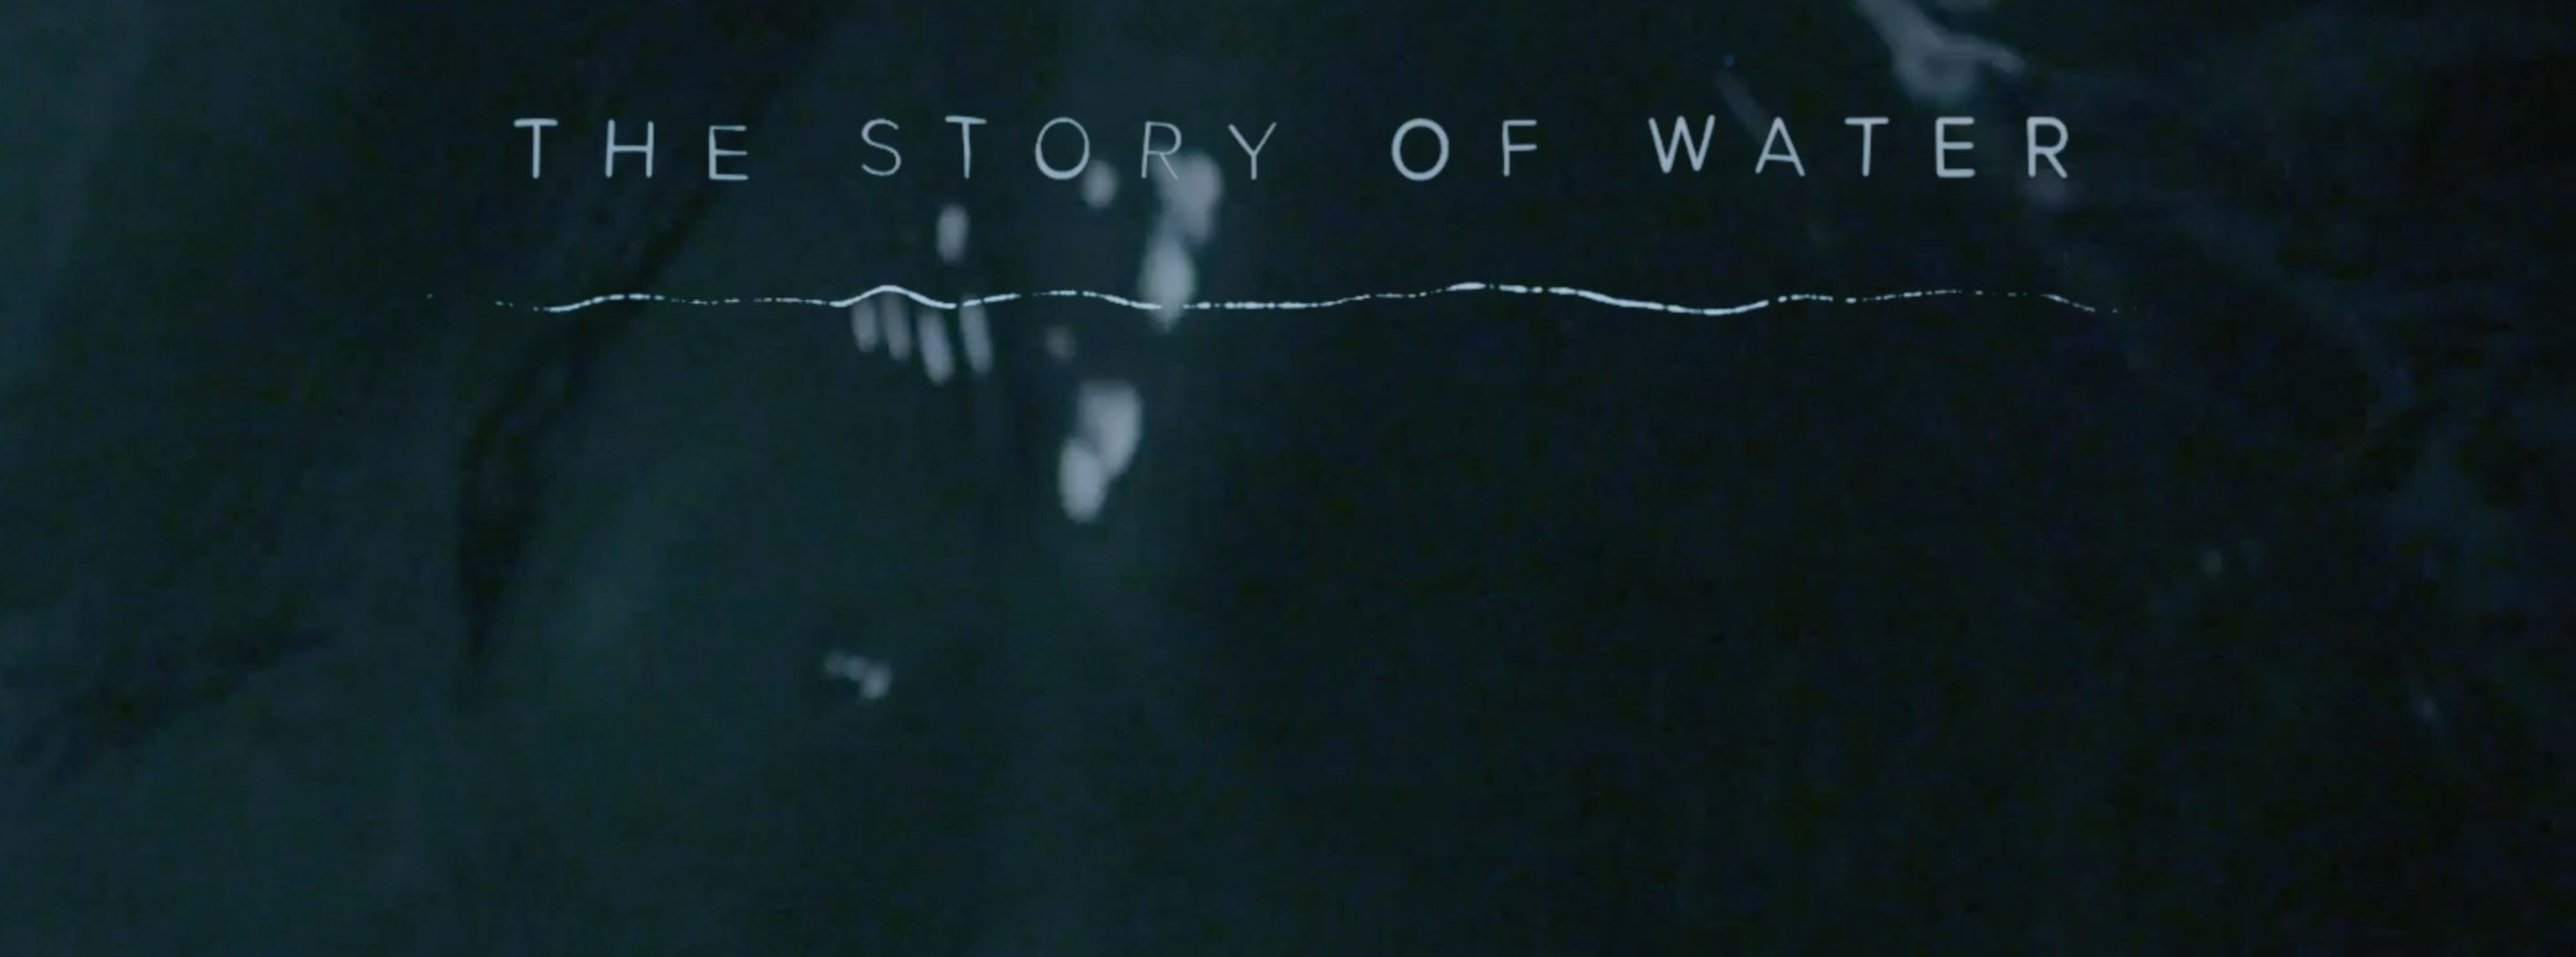 Story of Water video